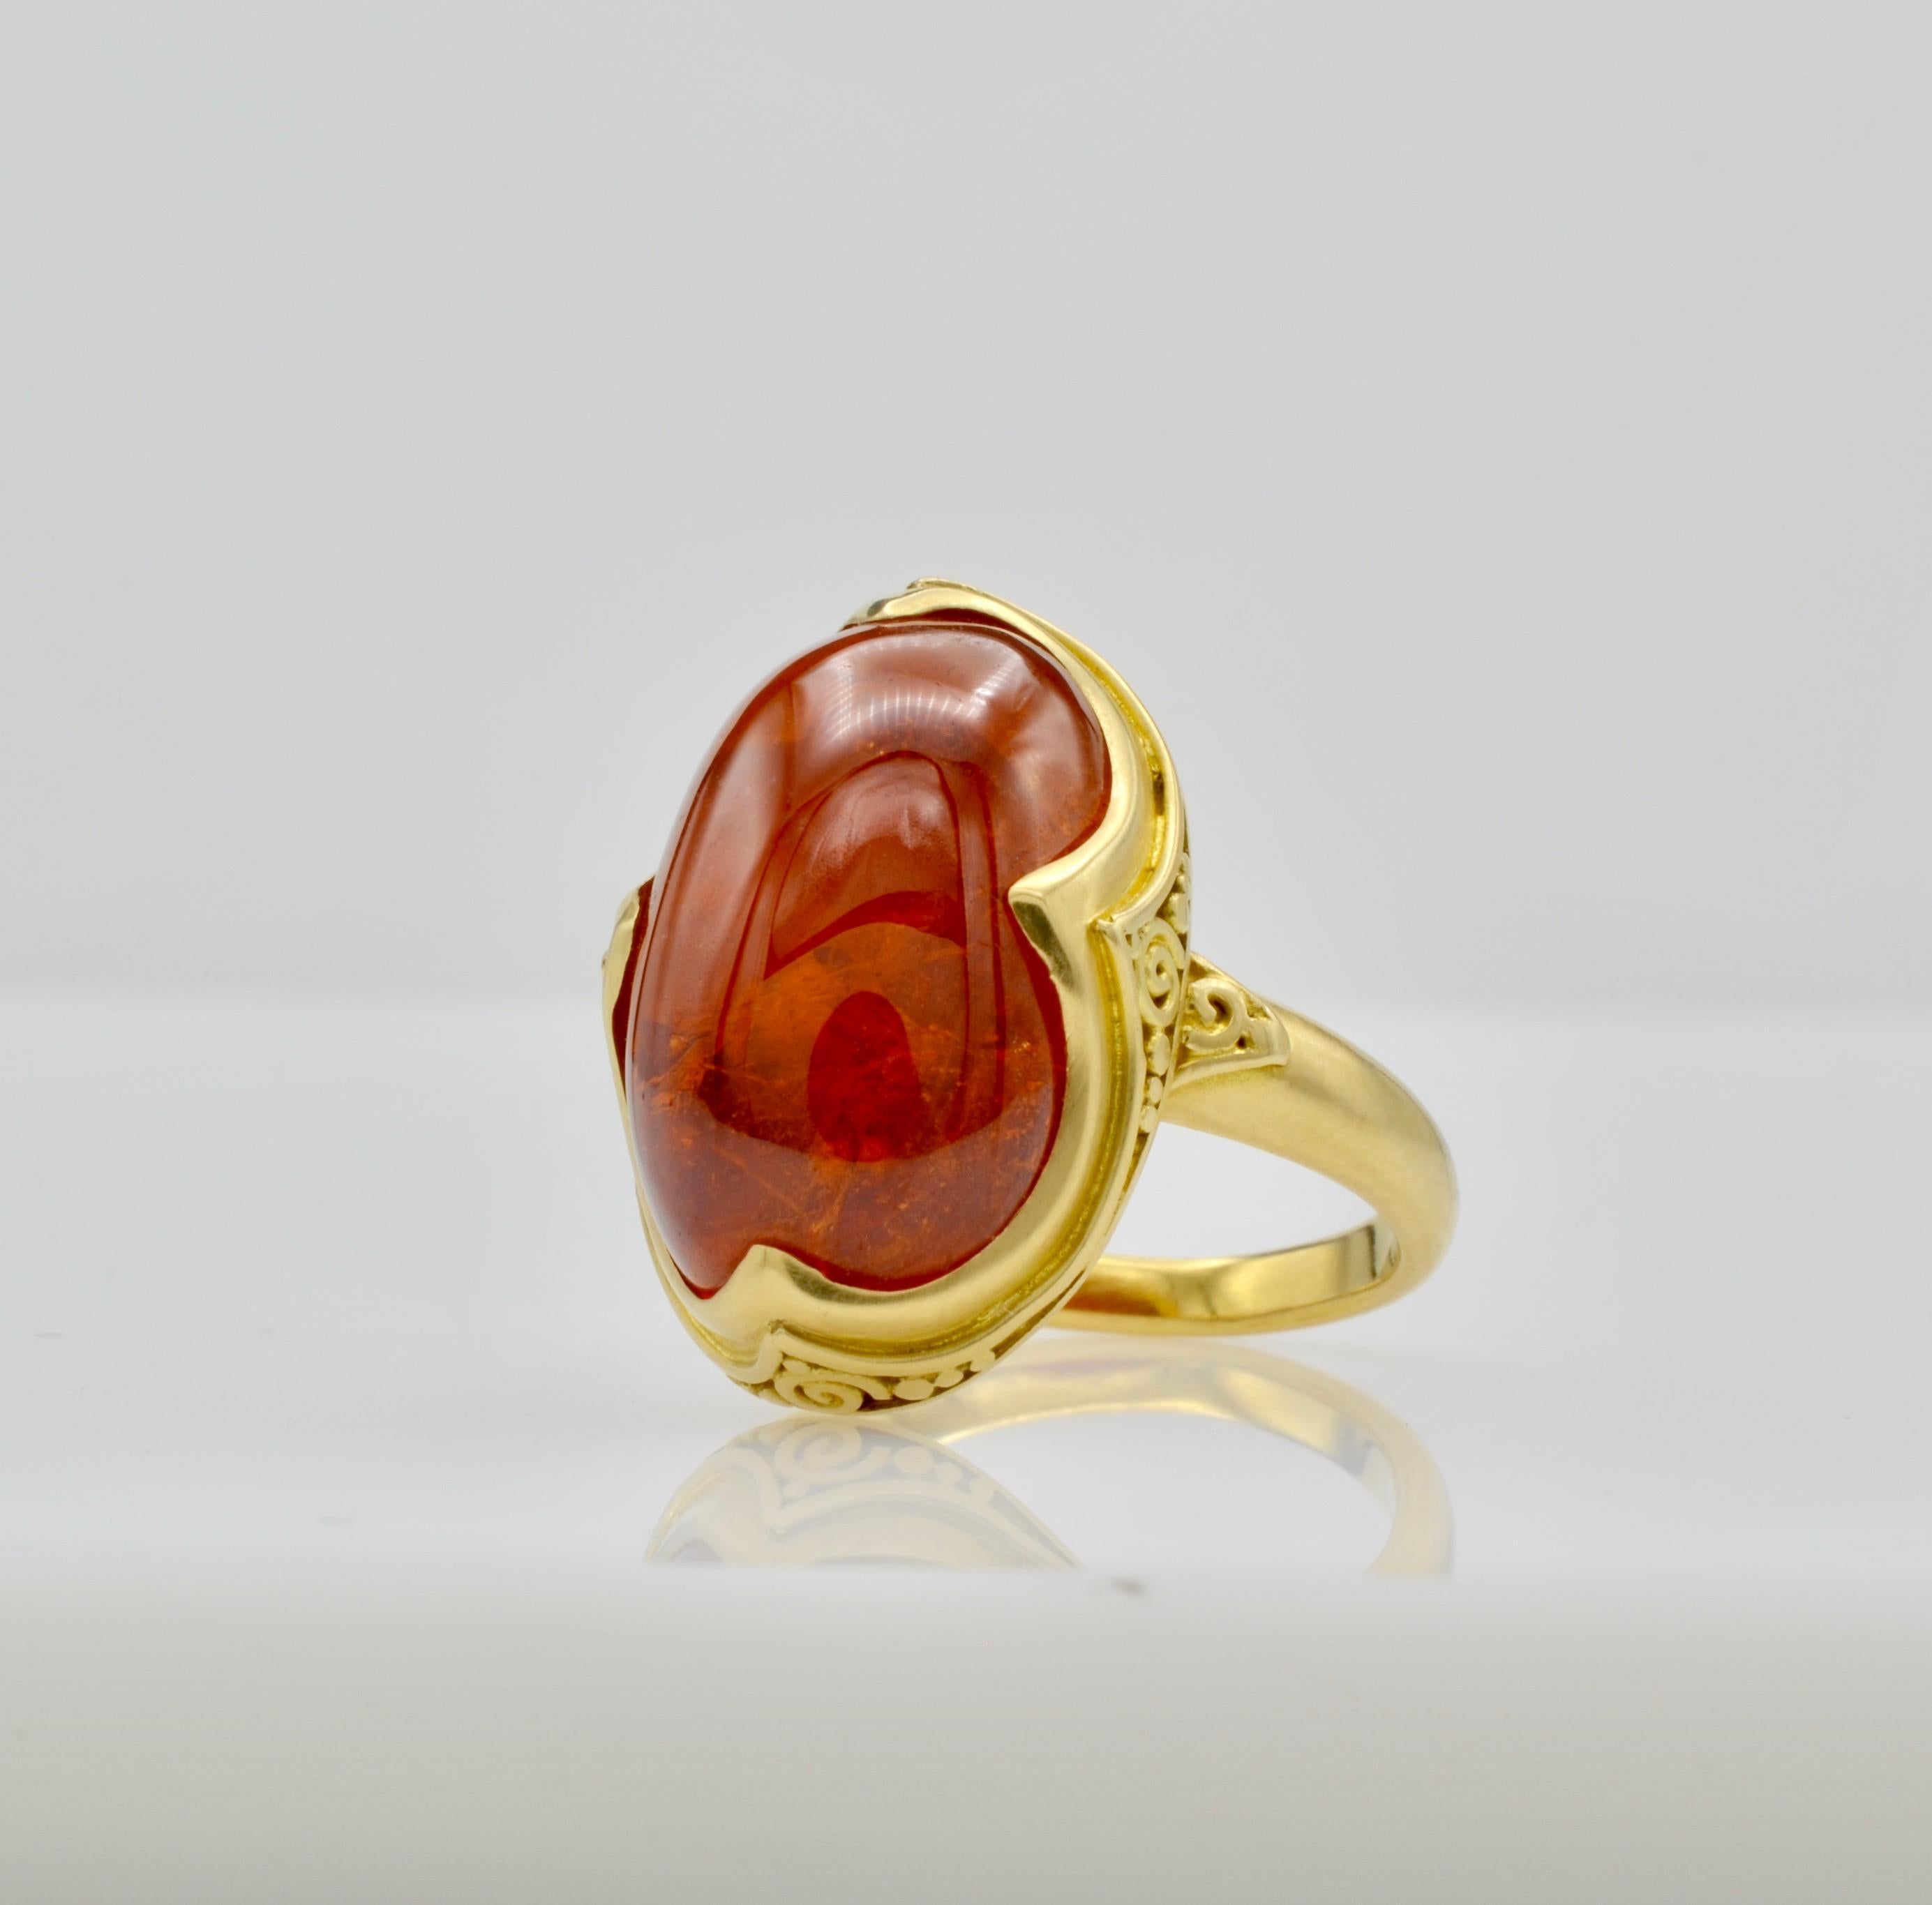 This deep orange tourmaline cabochon Steven Battelle Designed ring is approximately 9.80 ct. and glows from within. The granular 18k gold setting beautifully frames the oval stone. The ring size is 7 1/8 and can be sized to fit your finger.